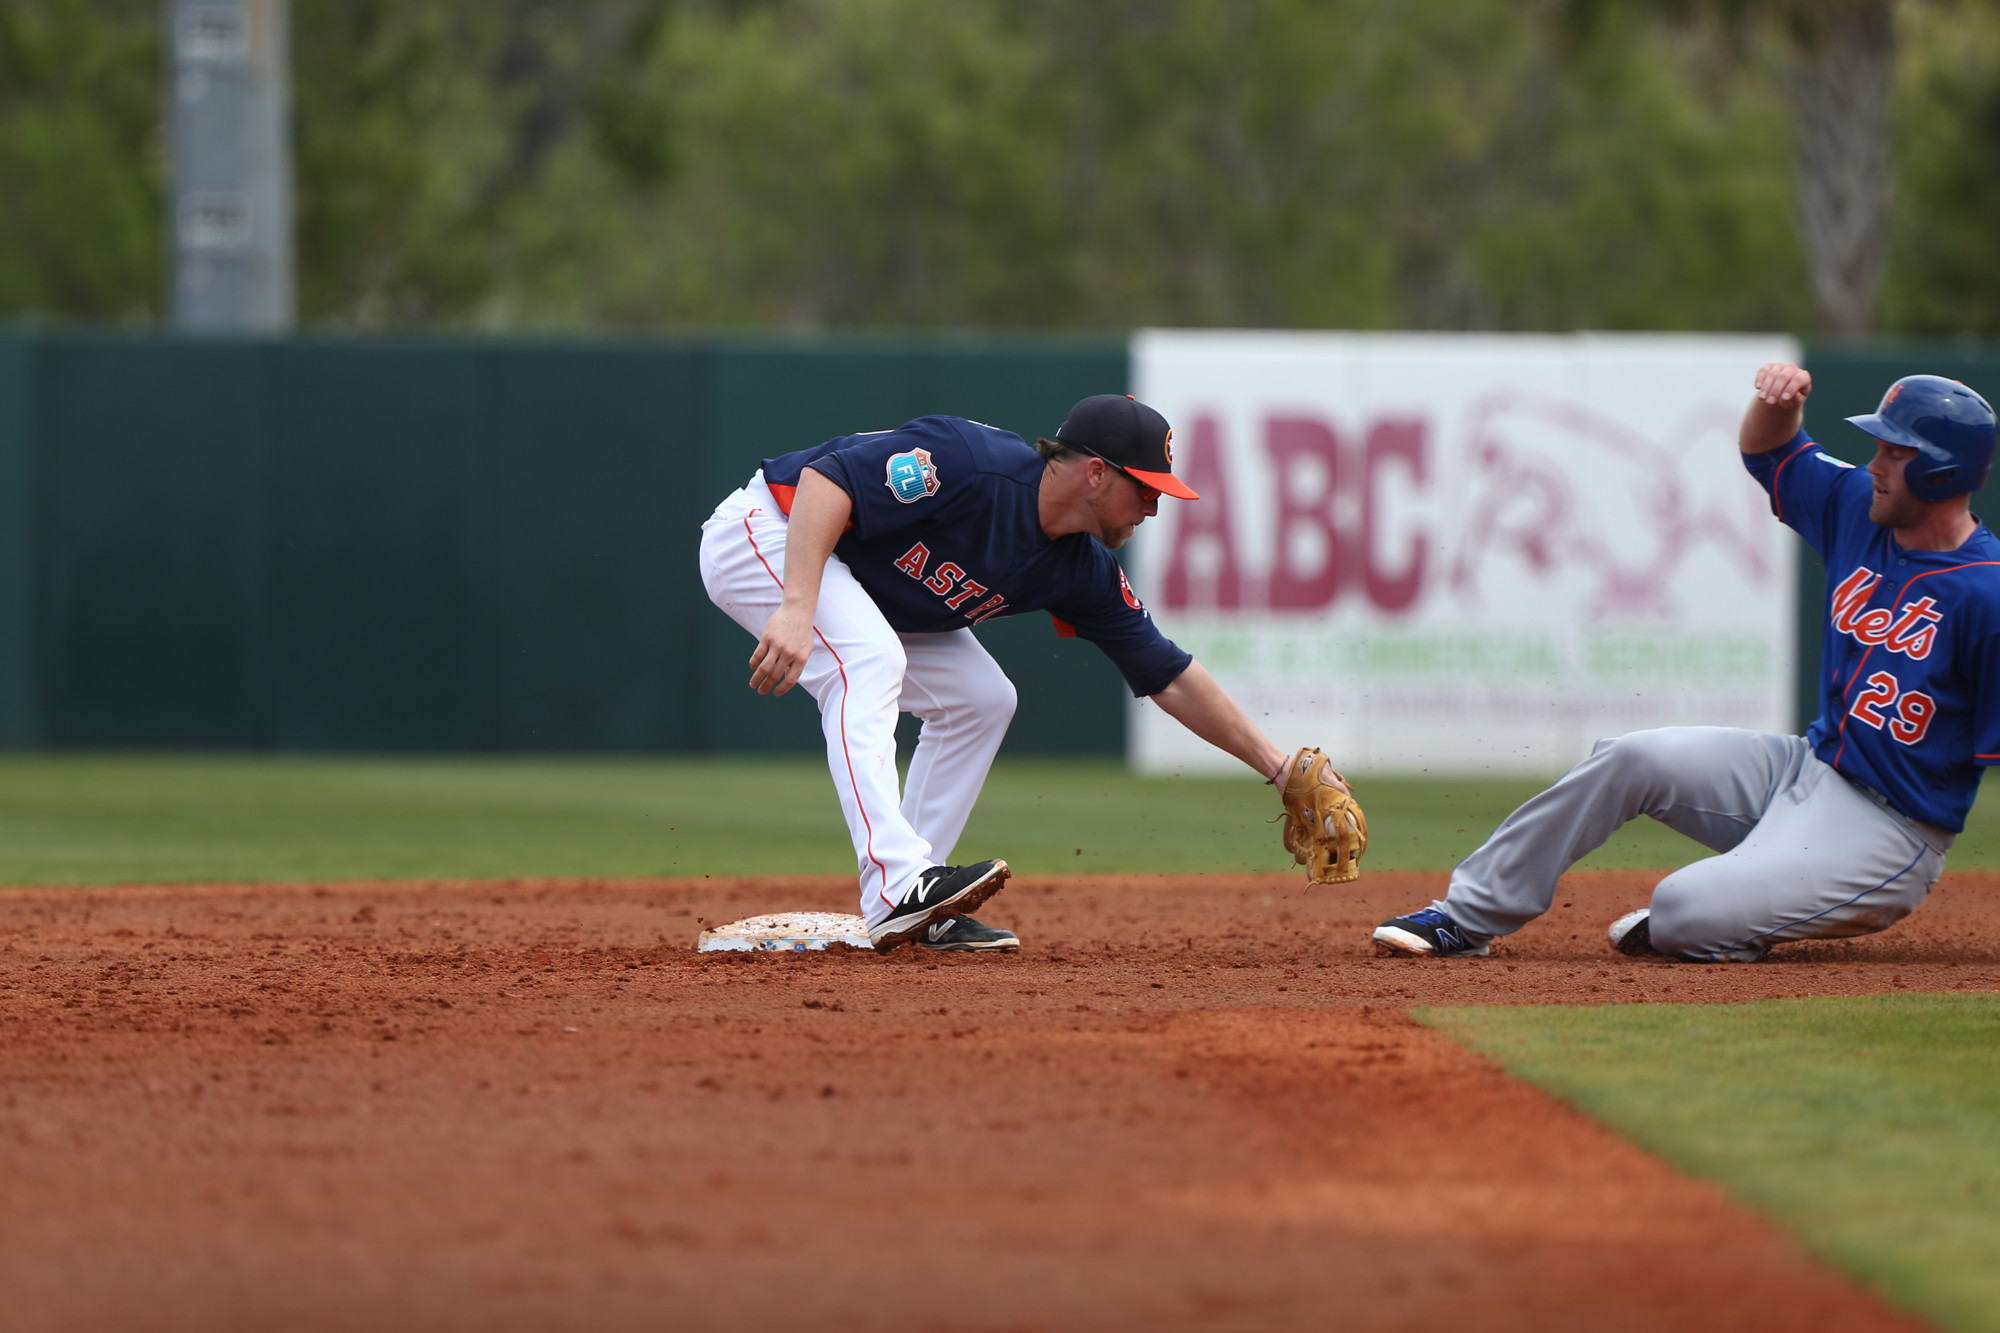 Winter Garden native Nolan Fontana played for the Triple-A Fresno Grizzlies in 2015, one step from making the Houston Astros. After participating in the Astros’ big-league spring training, Fontana is optimistic this could be the year he is called up.